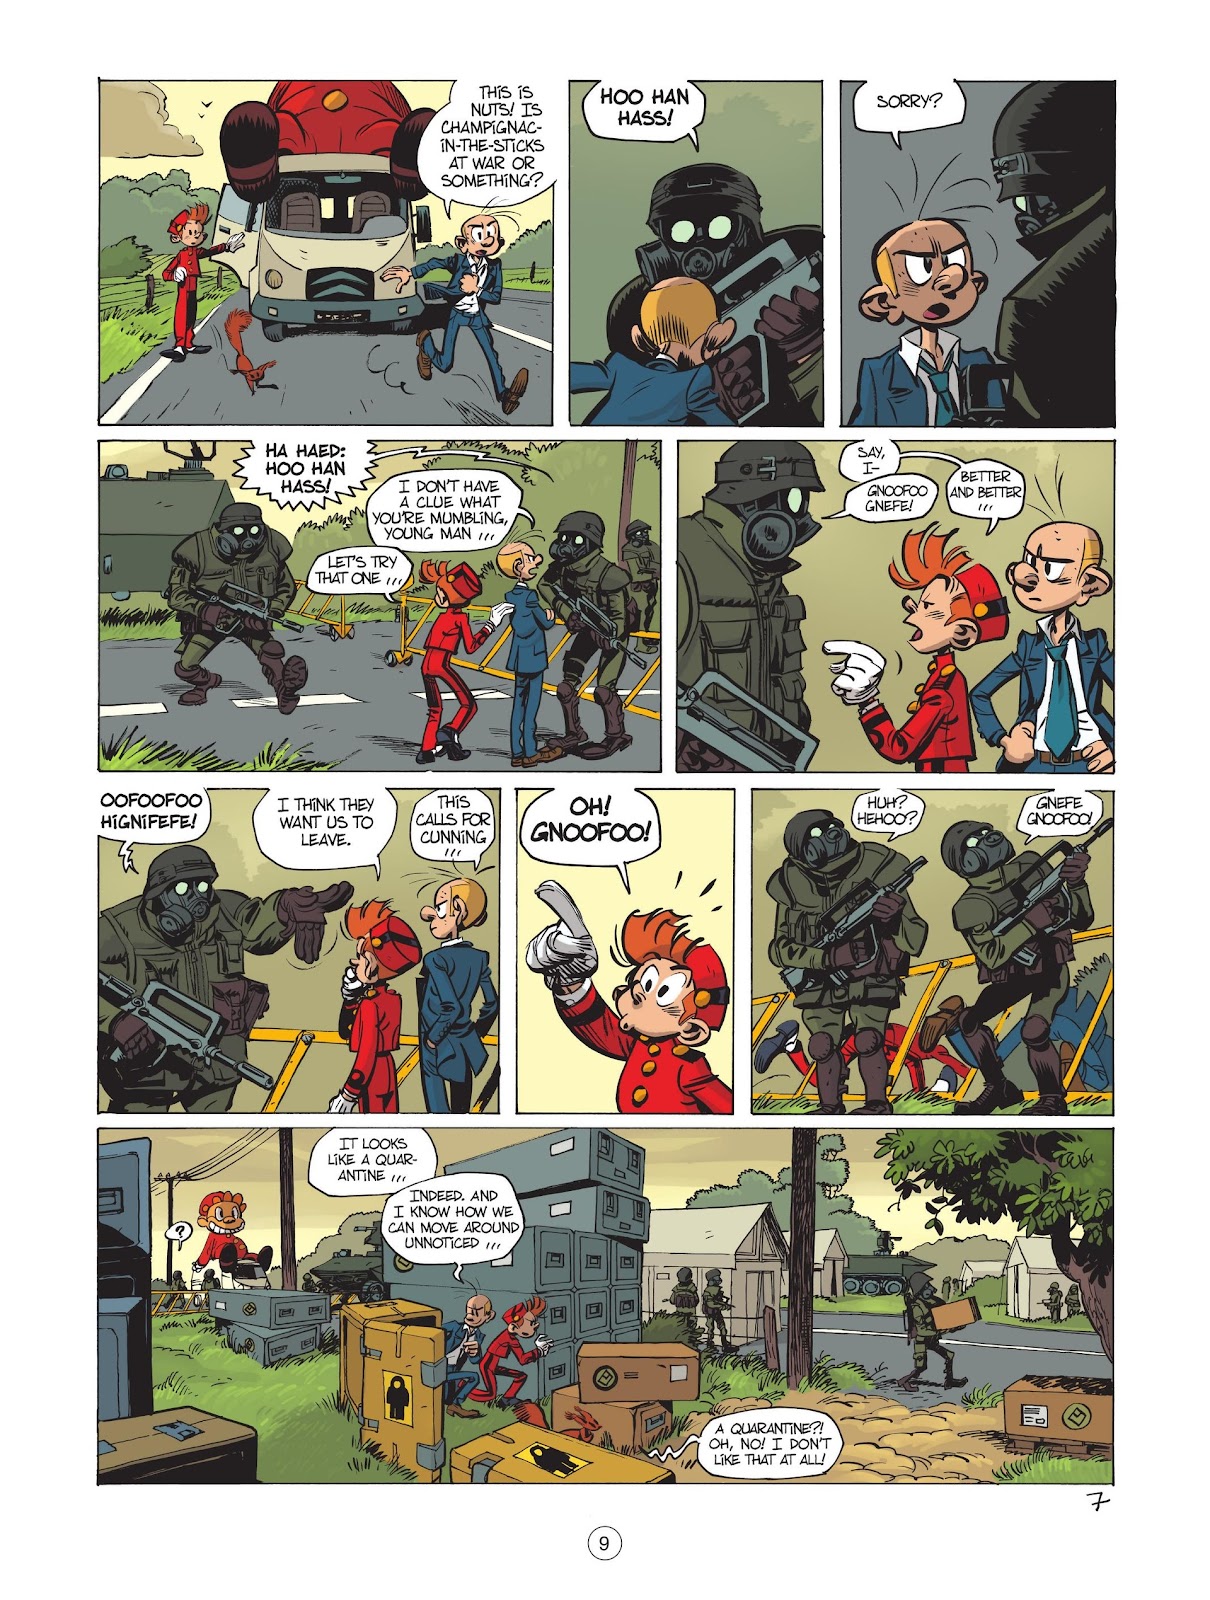 Spirou and Fantasio Attack of the Zordolts review